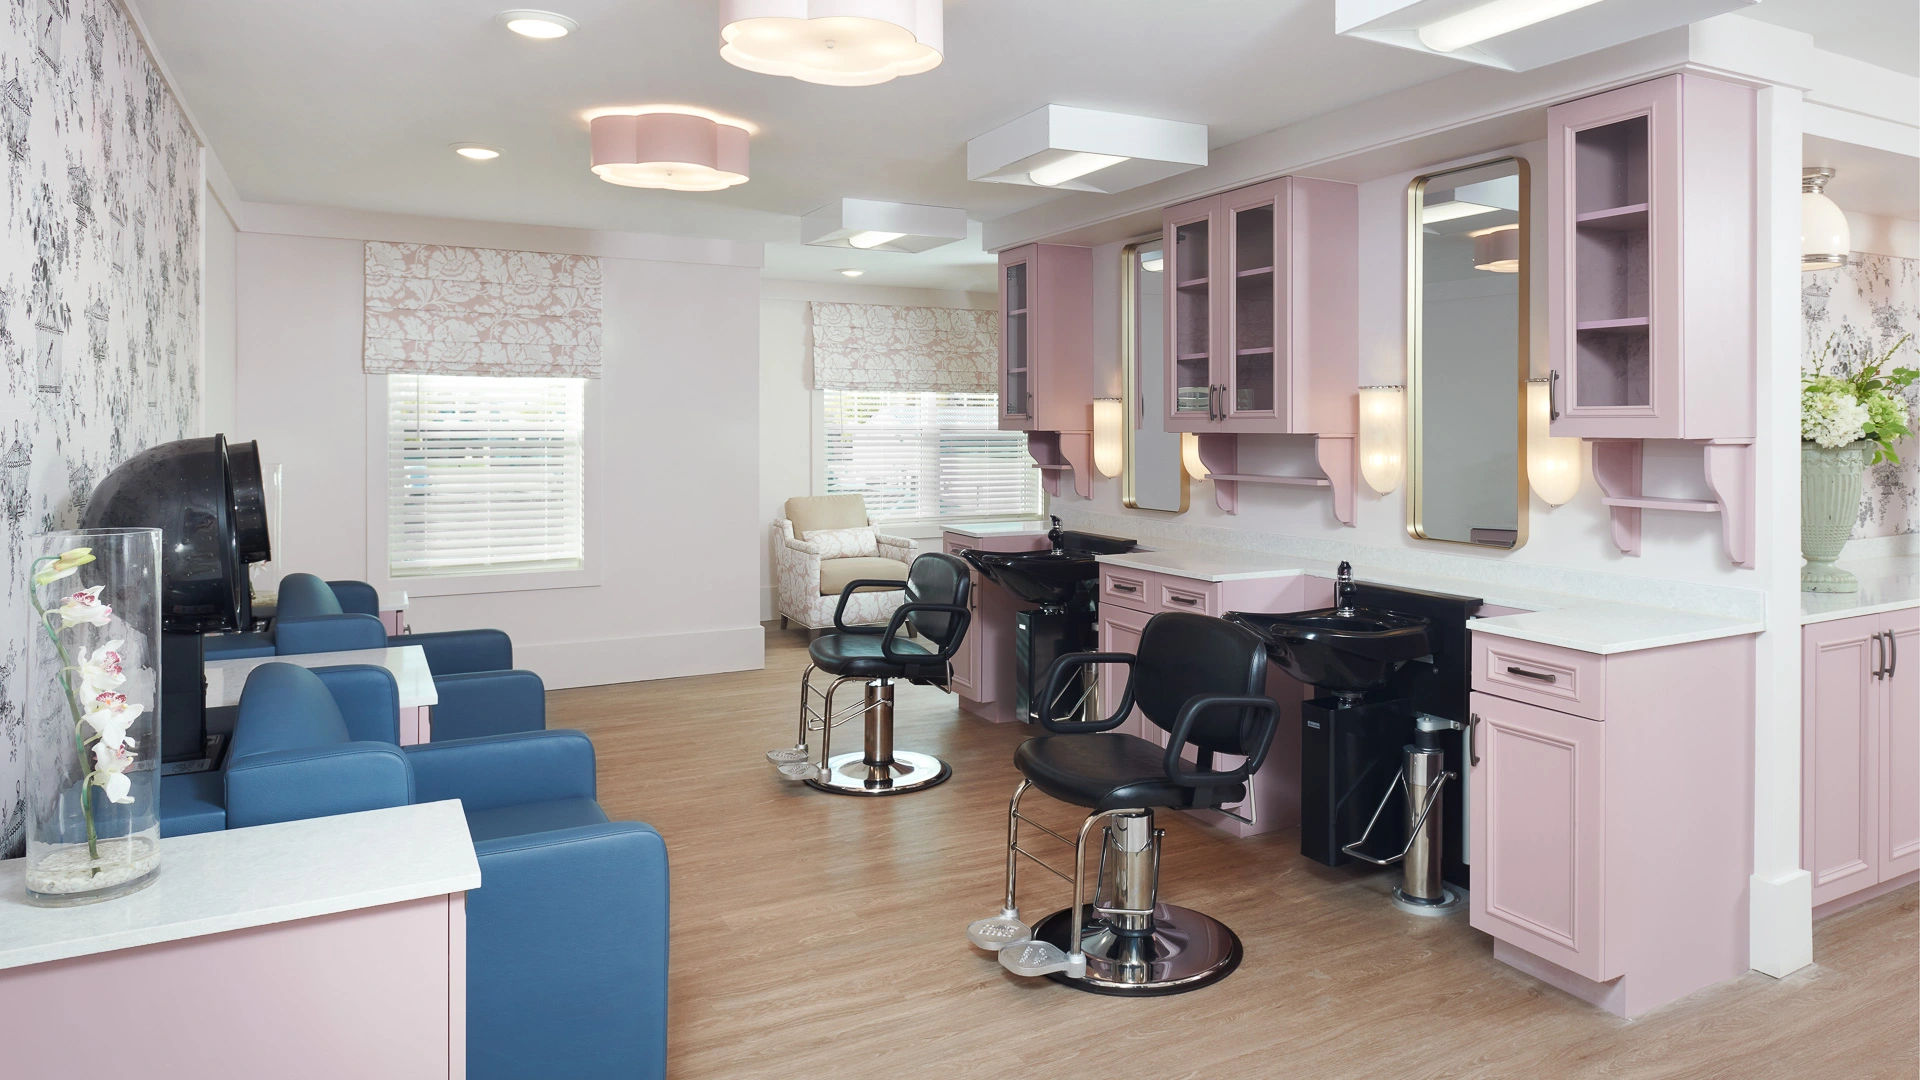 A very clean salon with pink cabinets at a retirement home in Bloomfield, MI